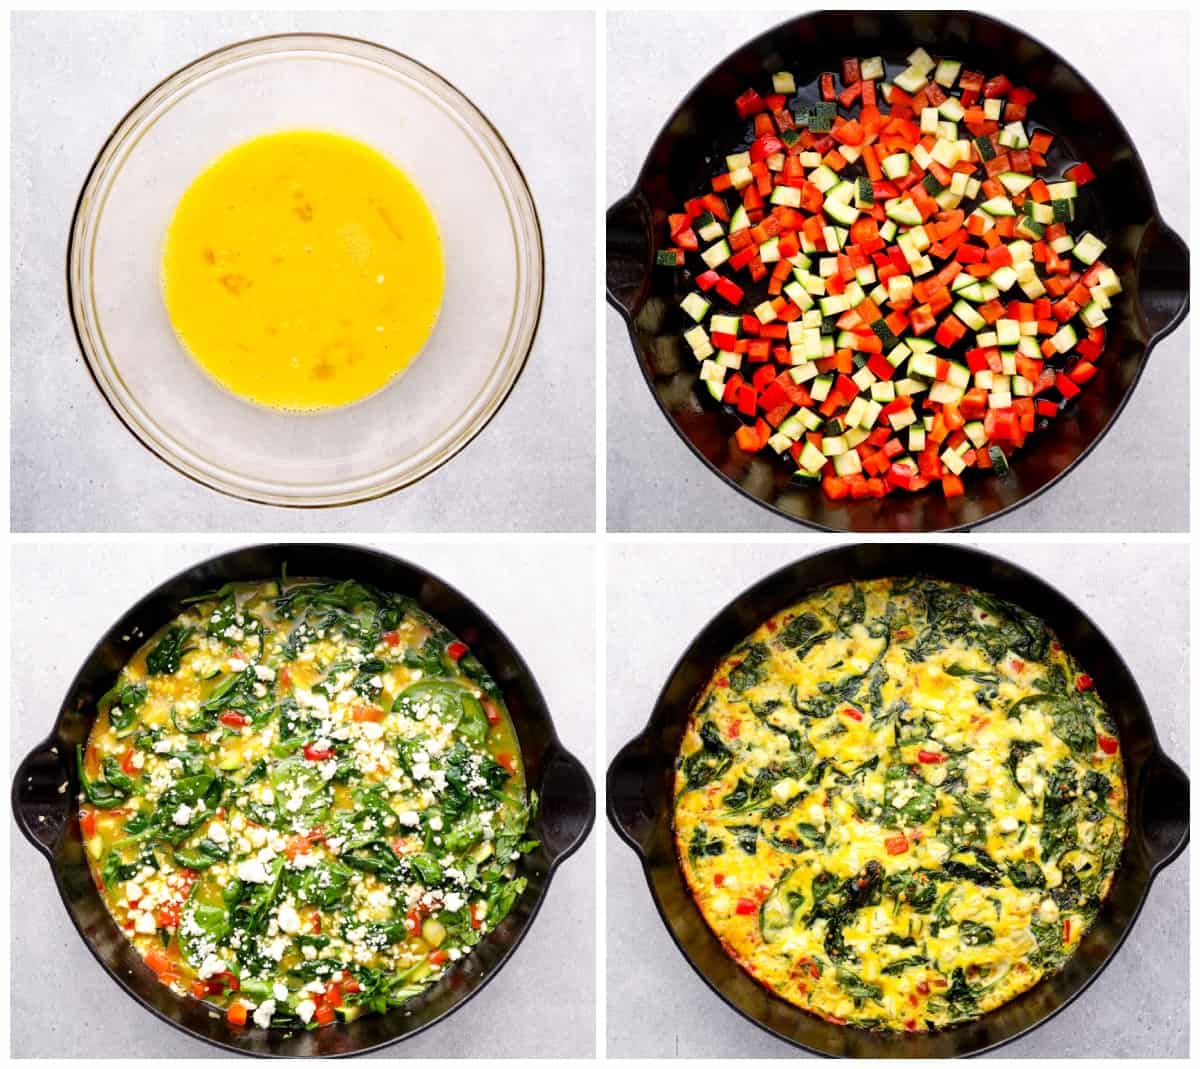 how to make a vegetable frittata step by step photo instructions